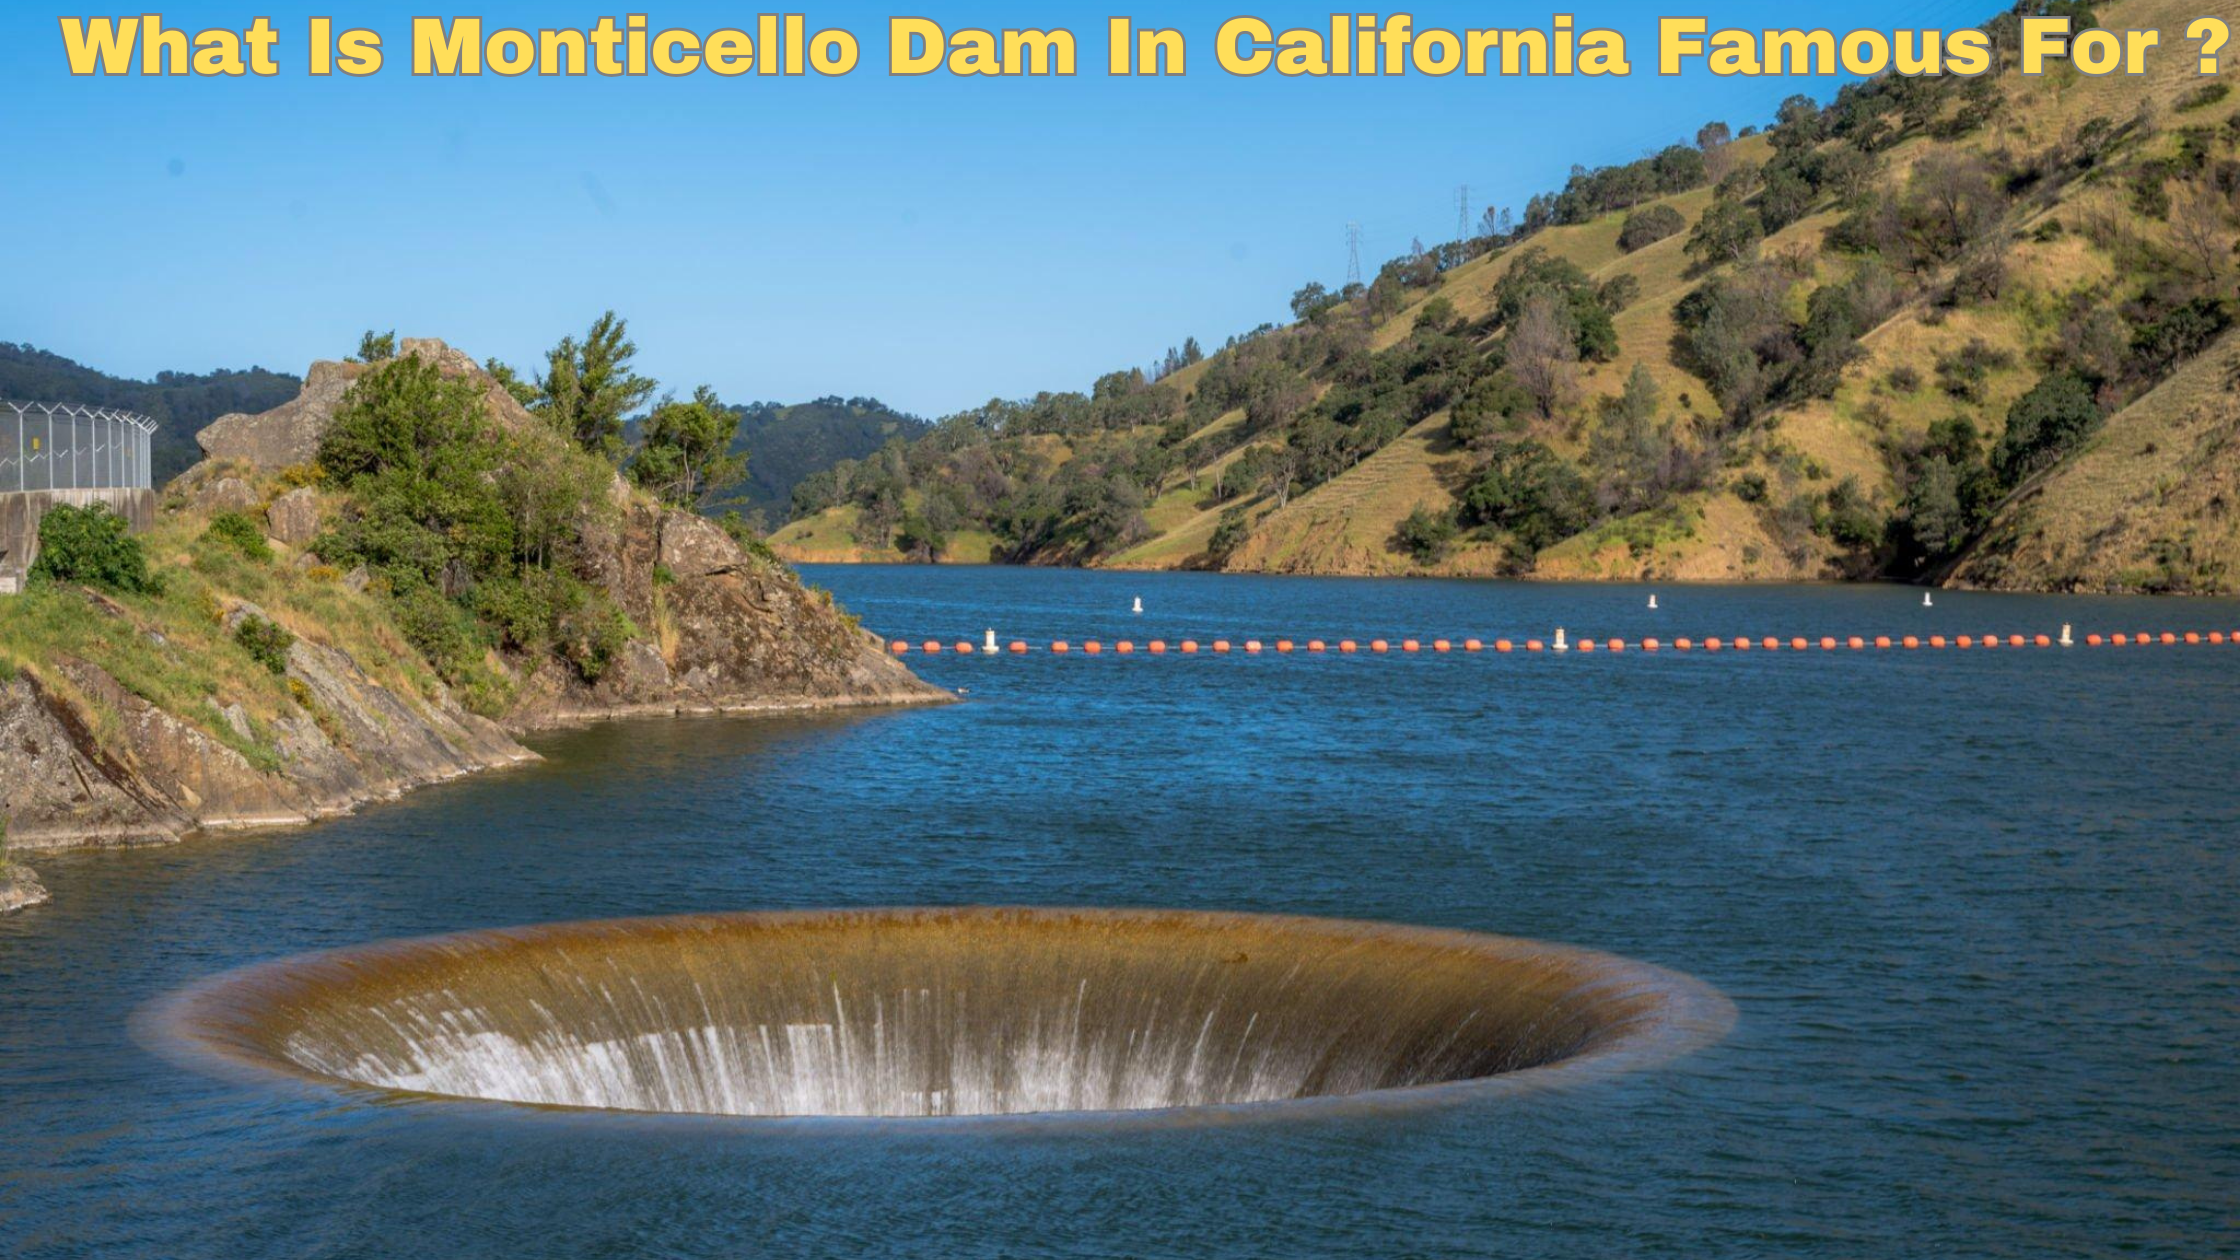 What Is Monticello Dam In California Famous For